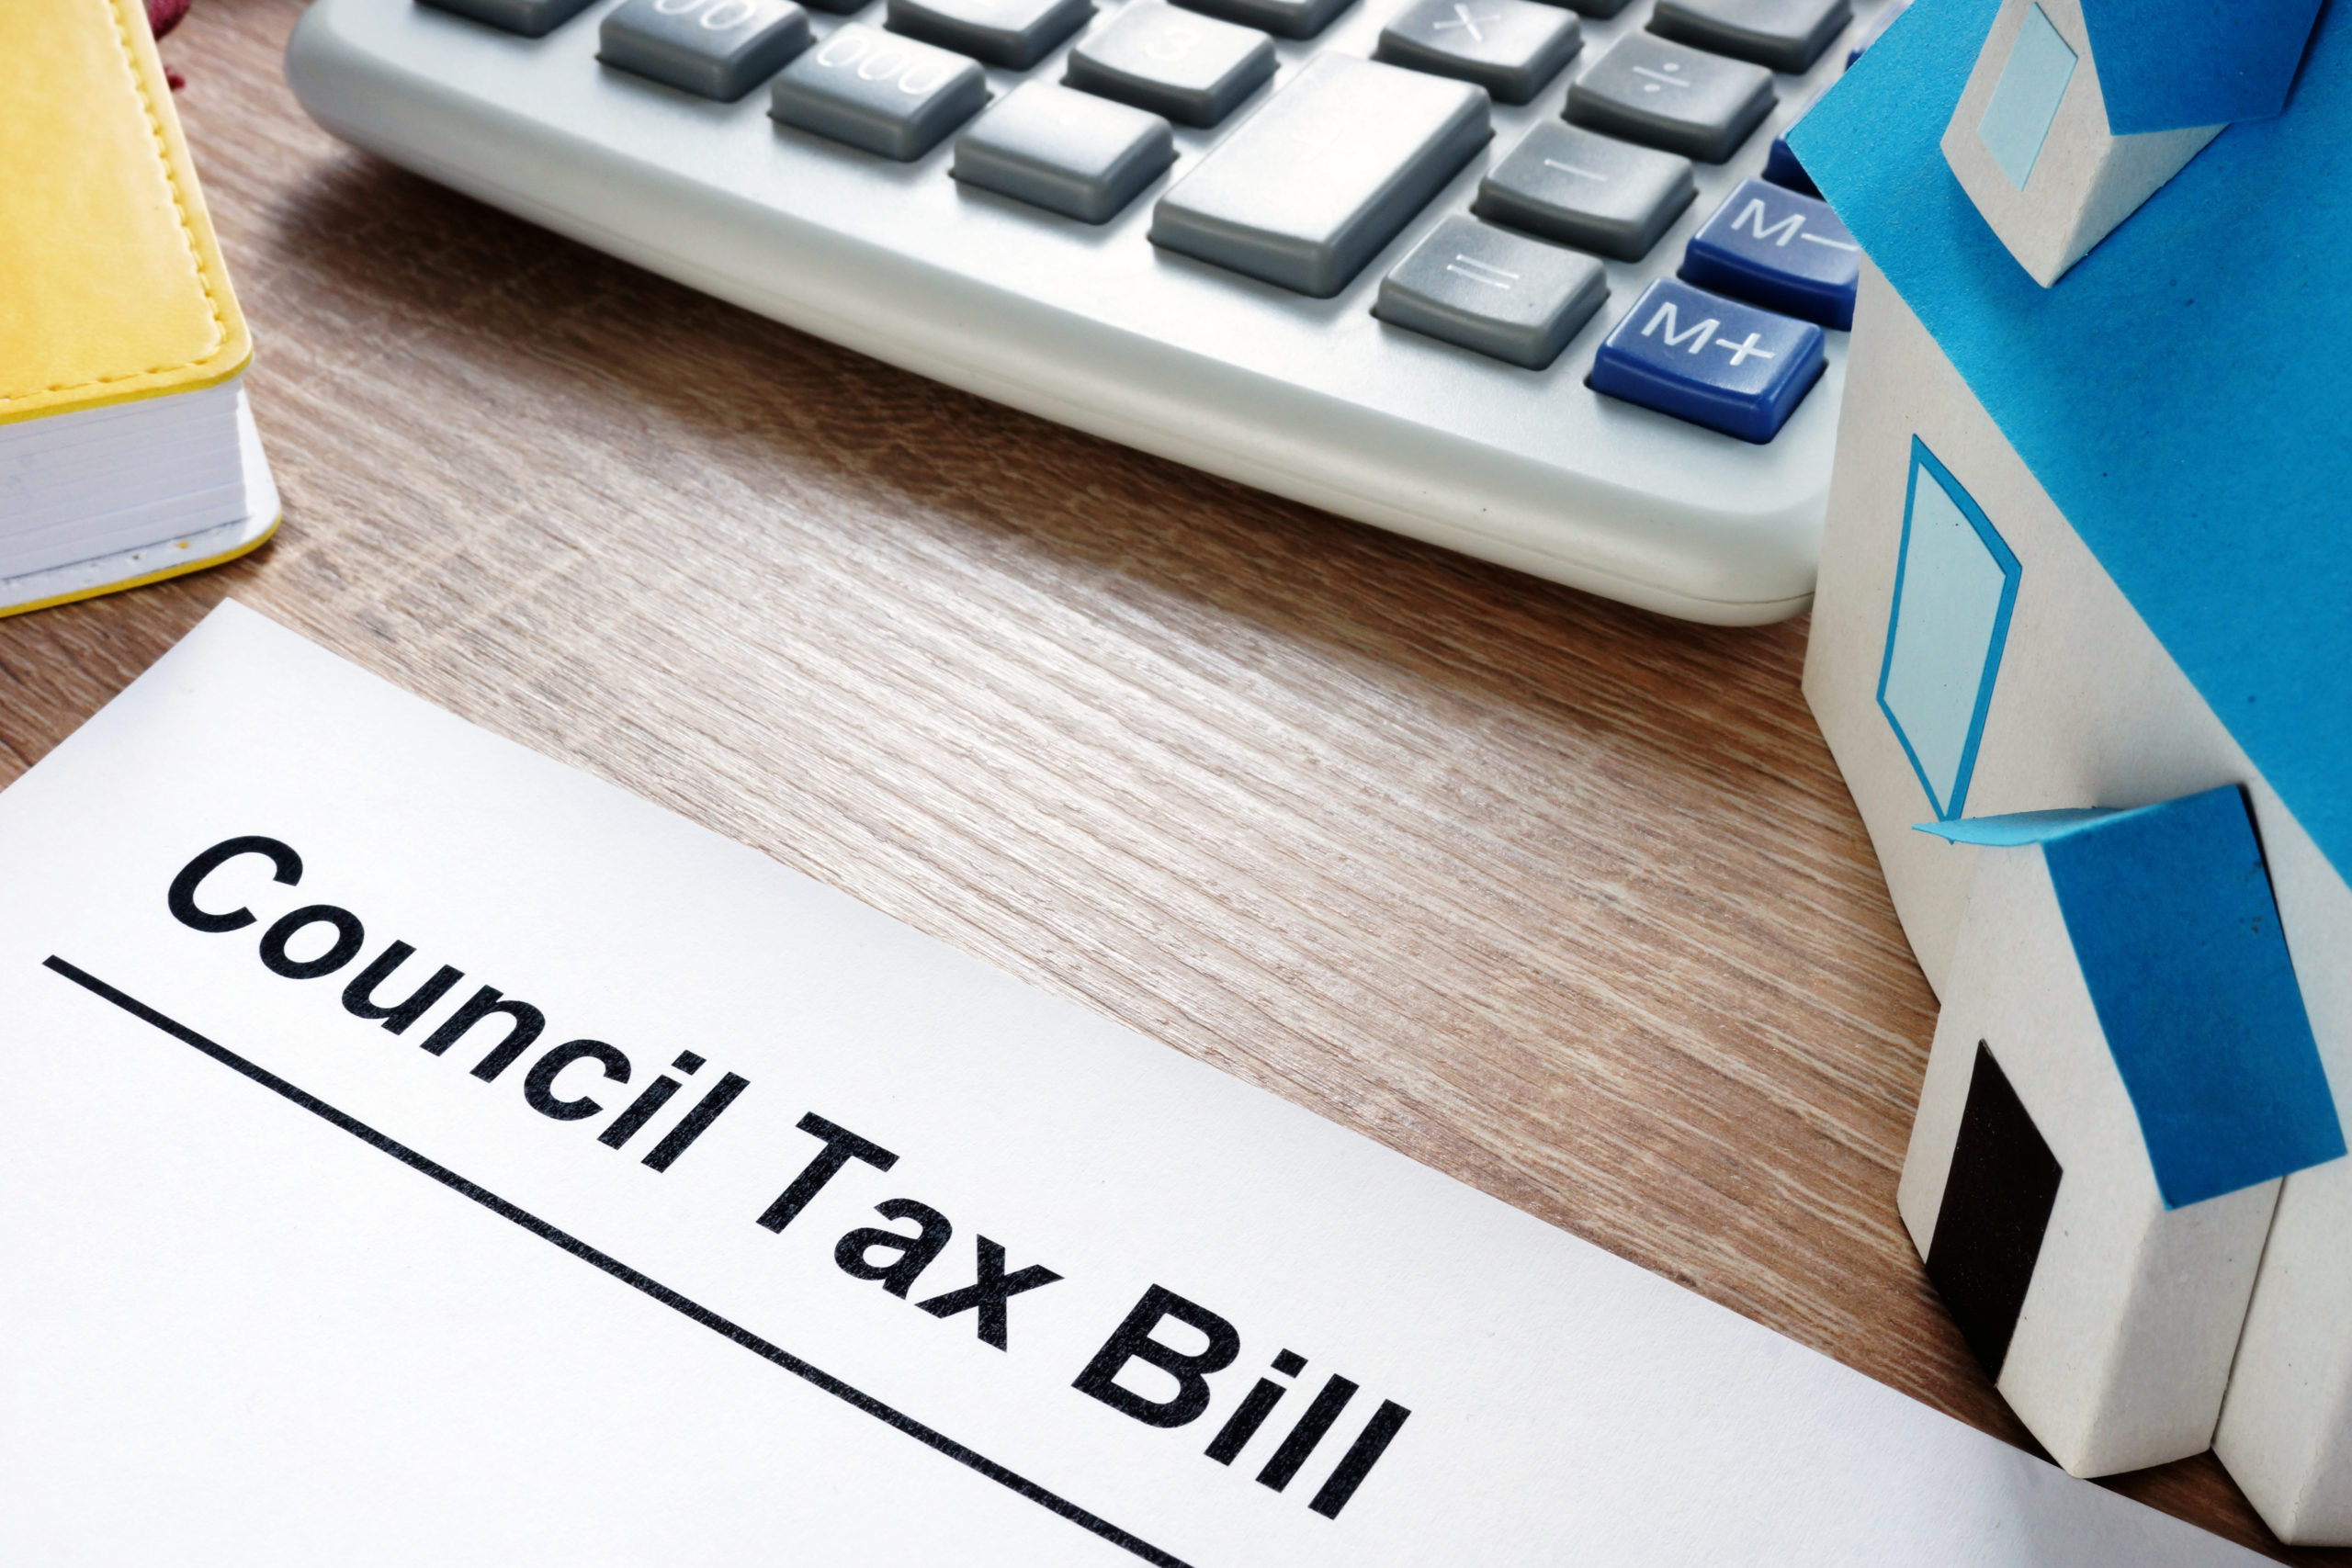 pay-council-tax-how-to-pay-your-council-tax-online-payment-in-2019